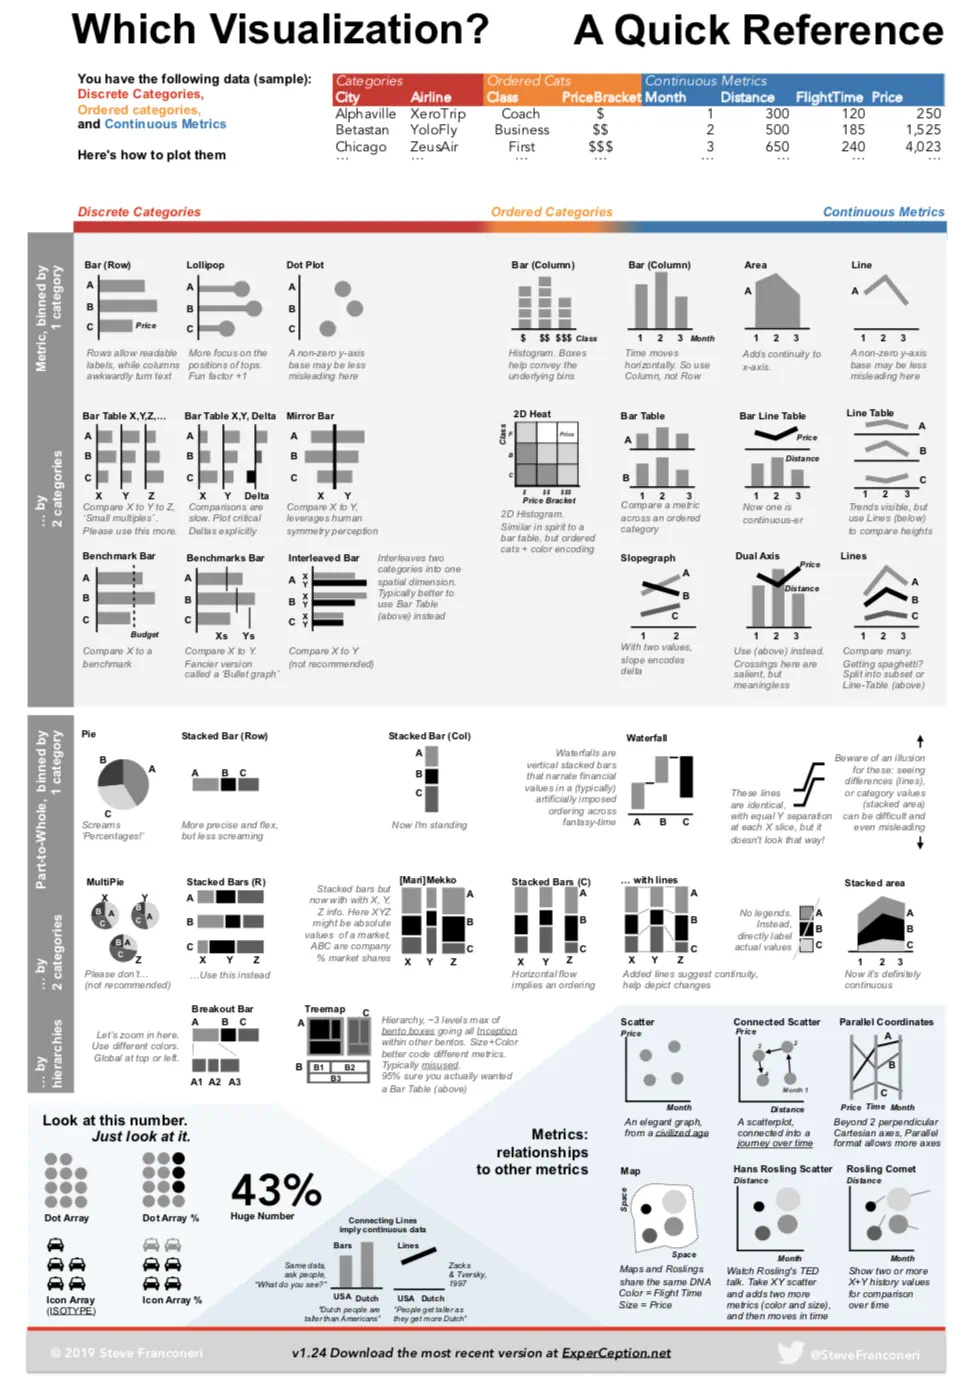 Quick reference guide to data visualization